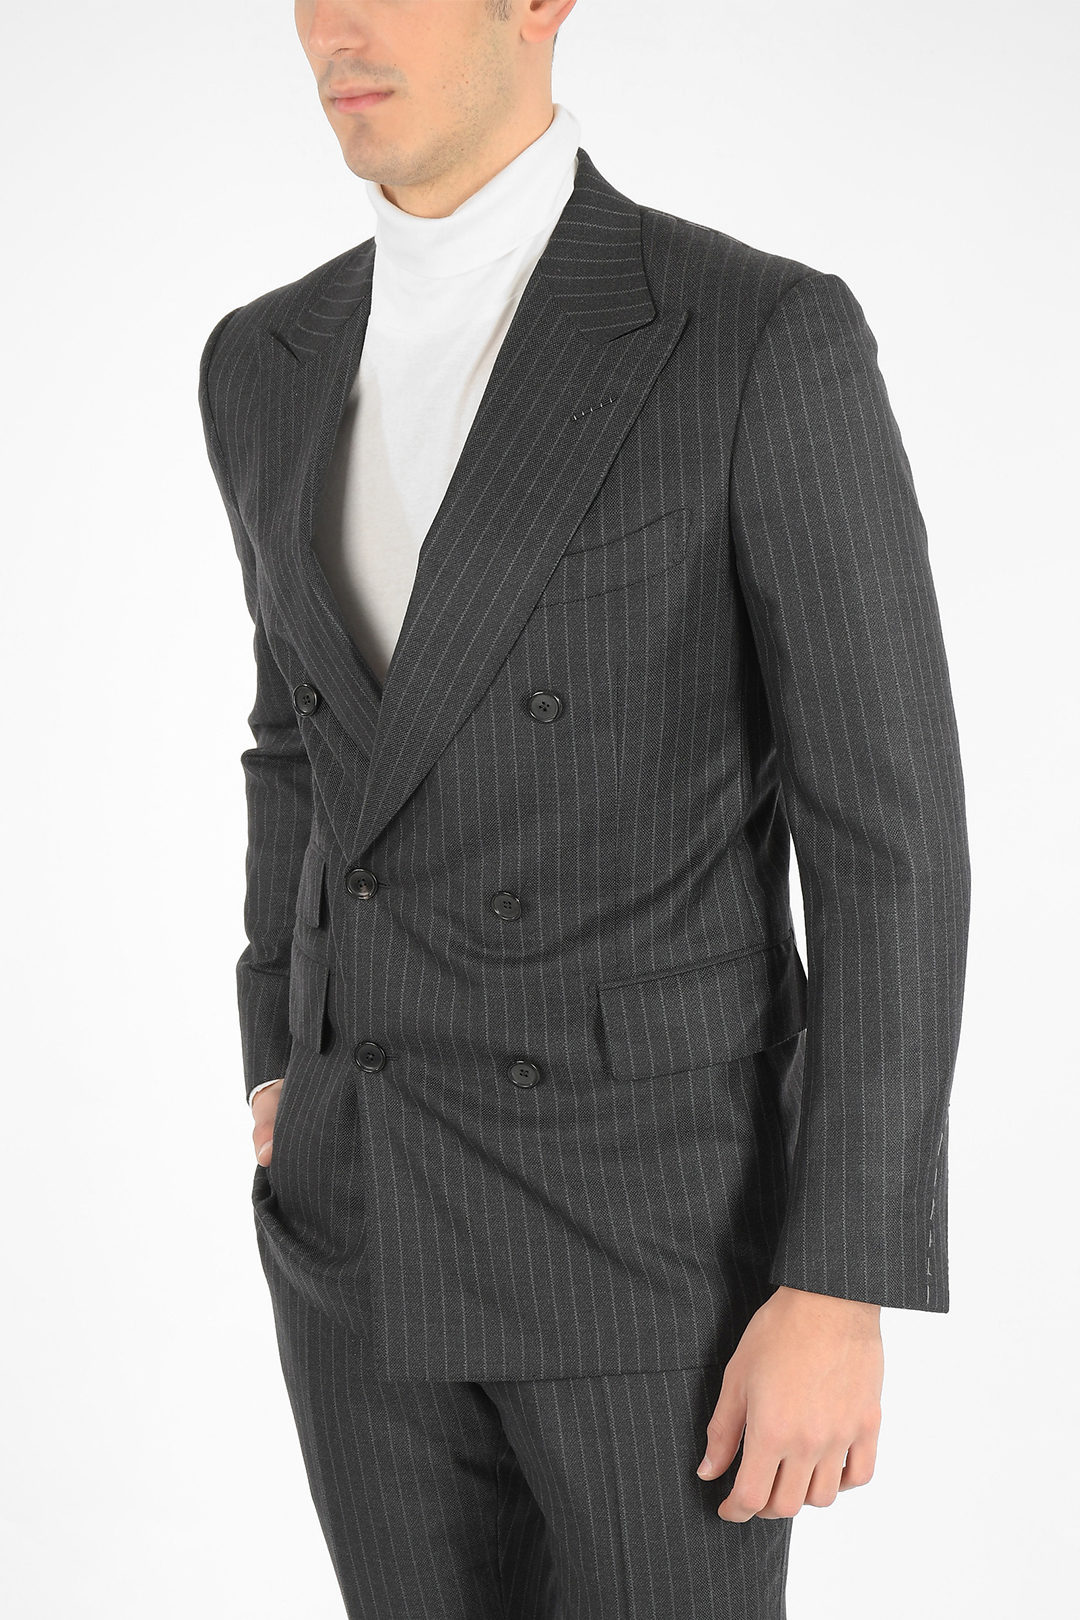 Tom Ford pinstriped center vent peak lapel 3-button double breasted ...